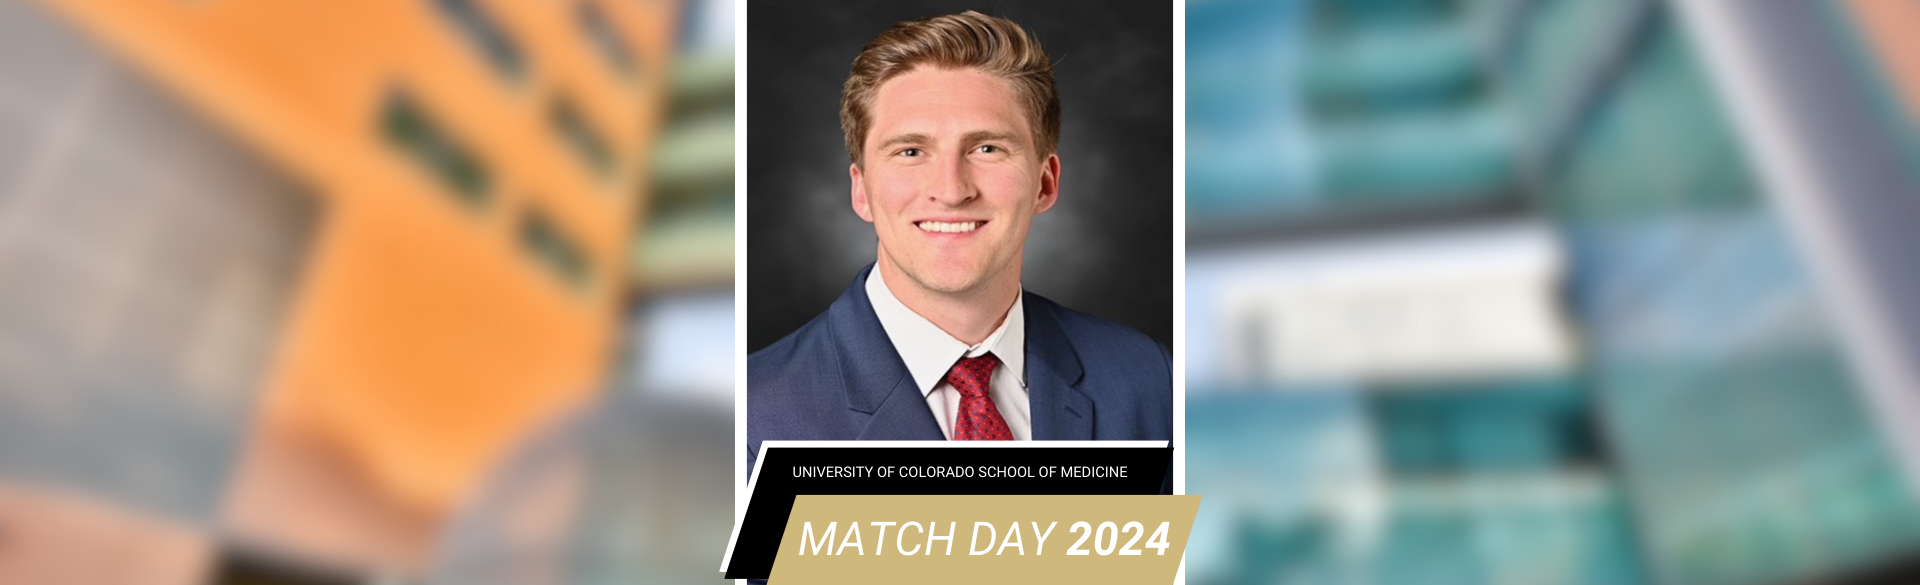 Image of Anthony Smyth with the text "Match Day 2024".